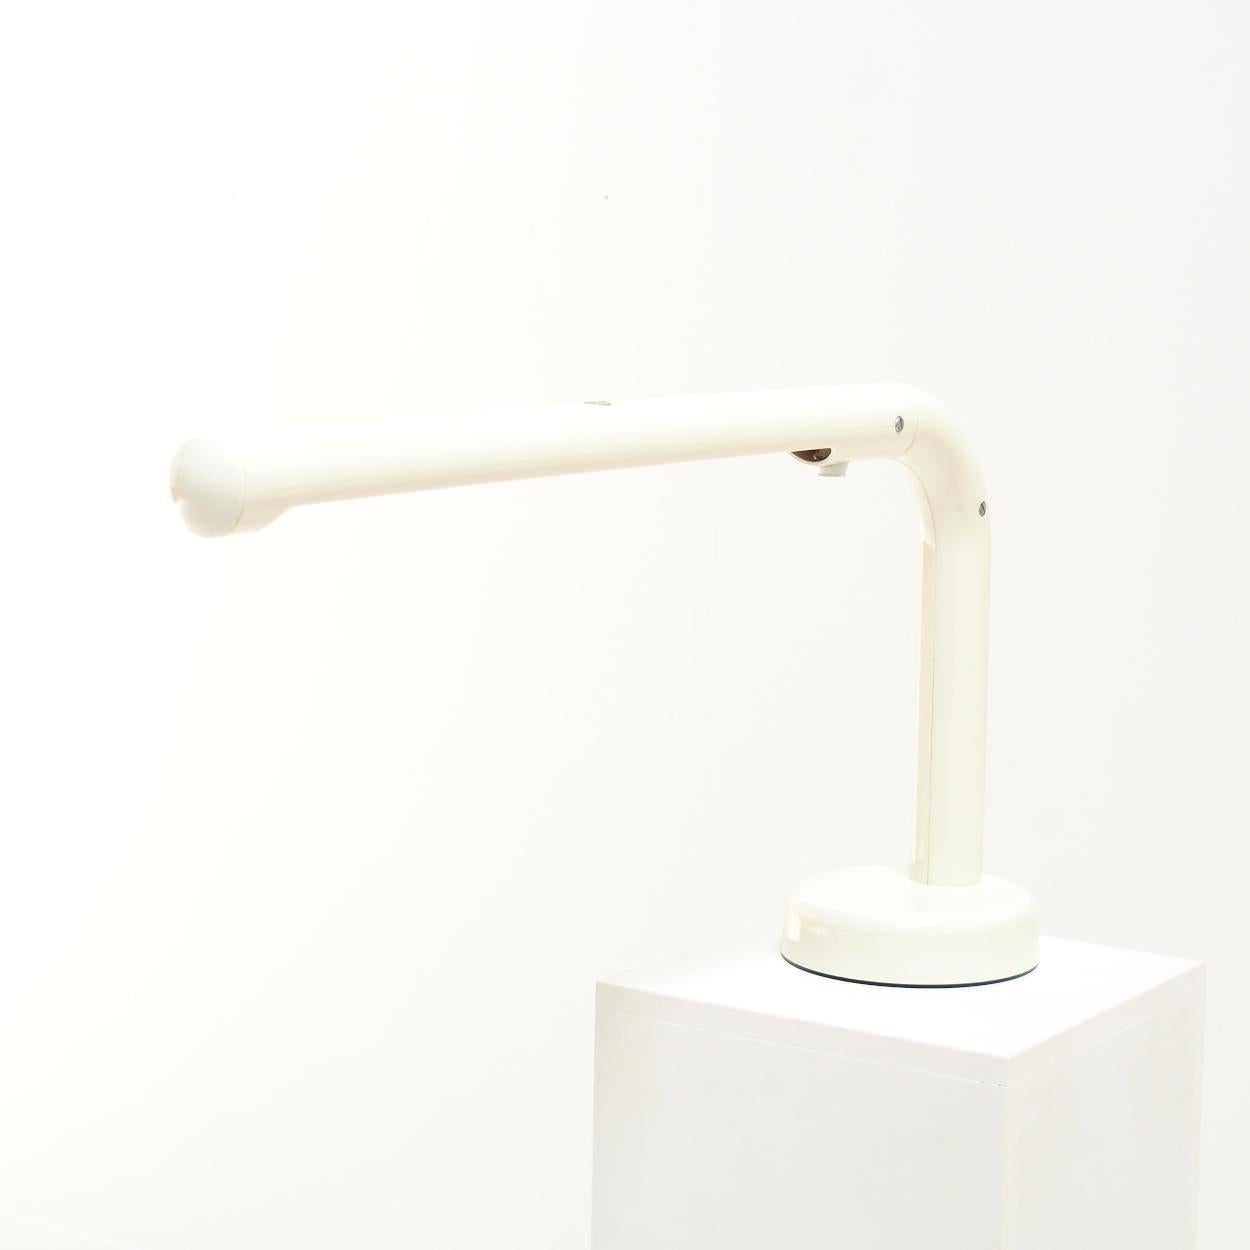 Very functional desk light, designed in 1973, by Swedish designer Anders Pehrson for Ateljé Lyktan.

I think it’s a very clever design. It is not only a beautiful lamp with progressive design techniques for that time, but also the height of the lamp